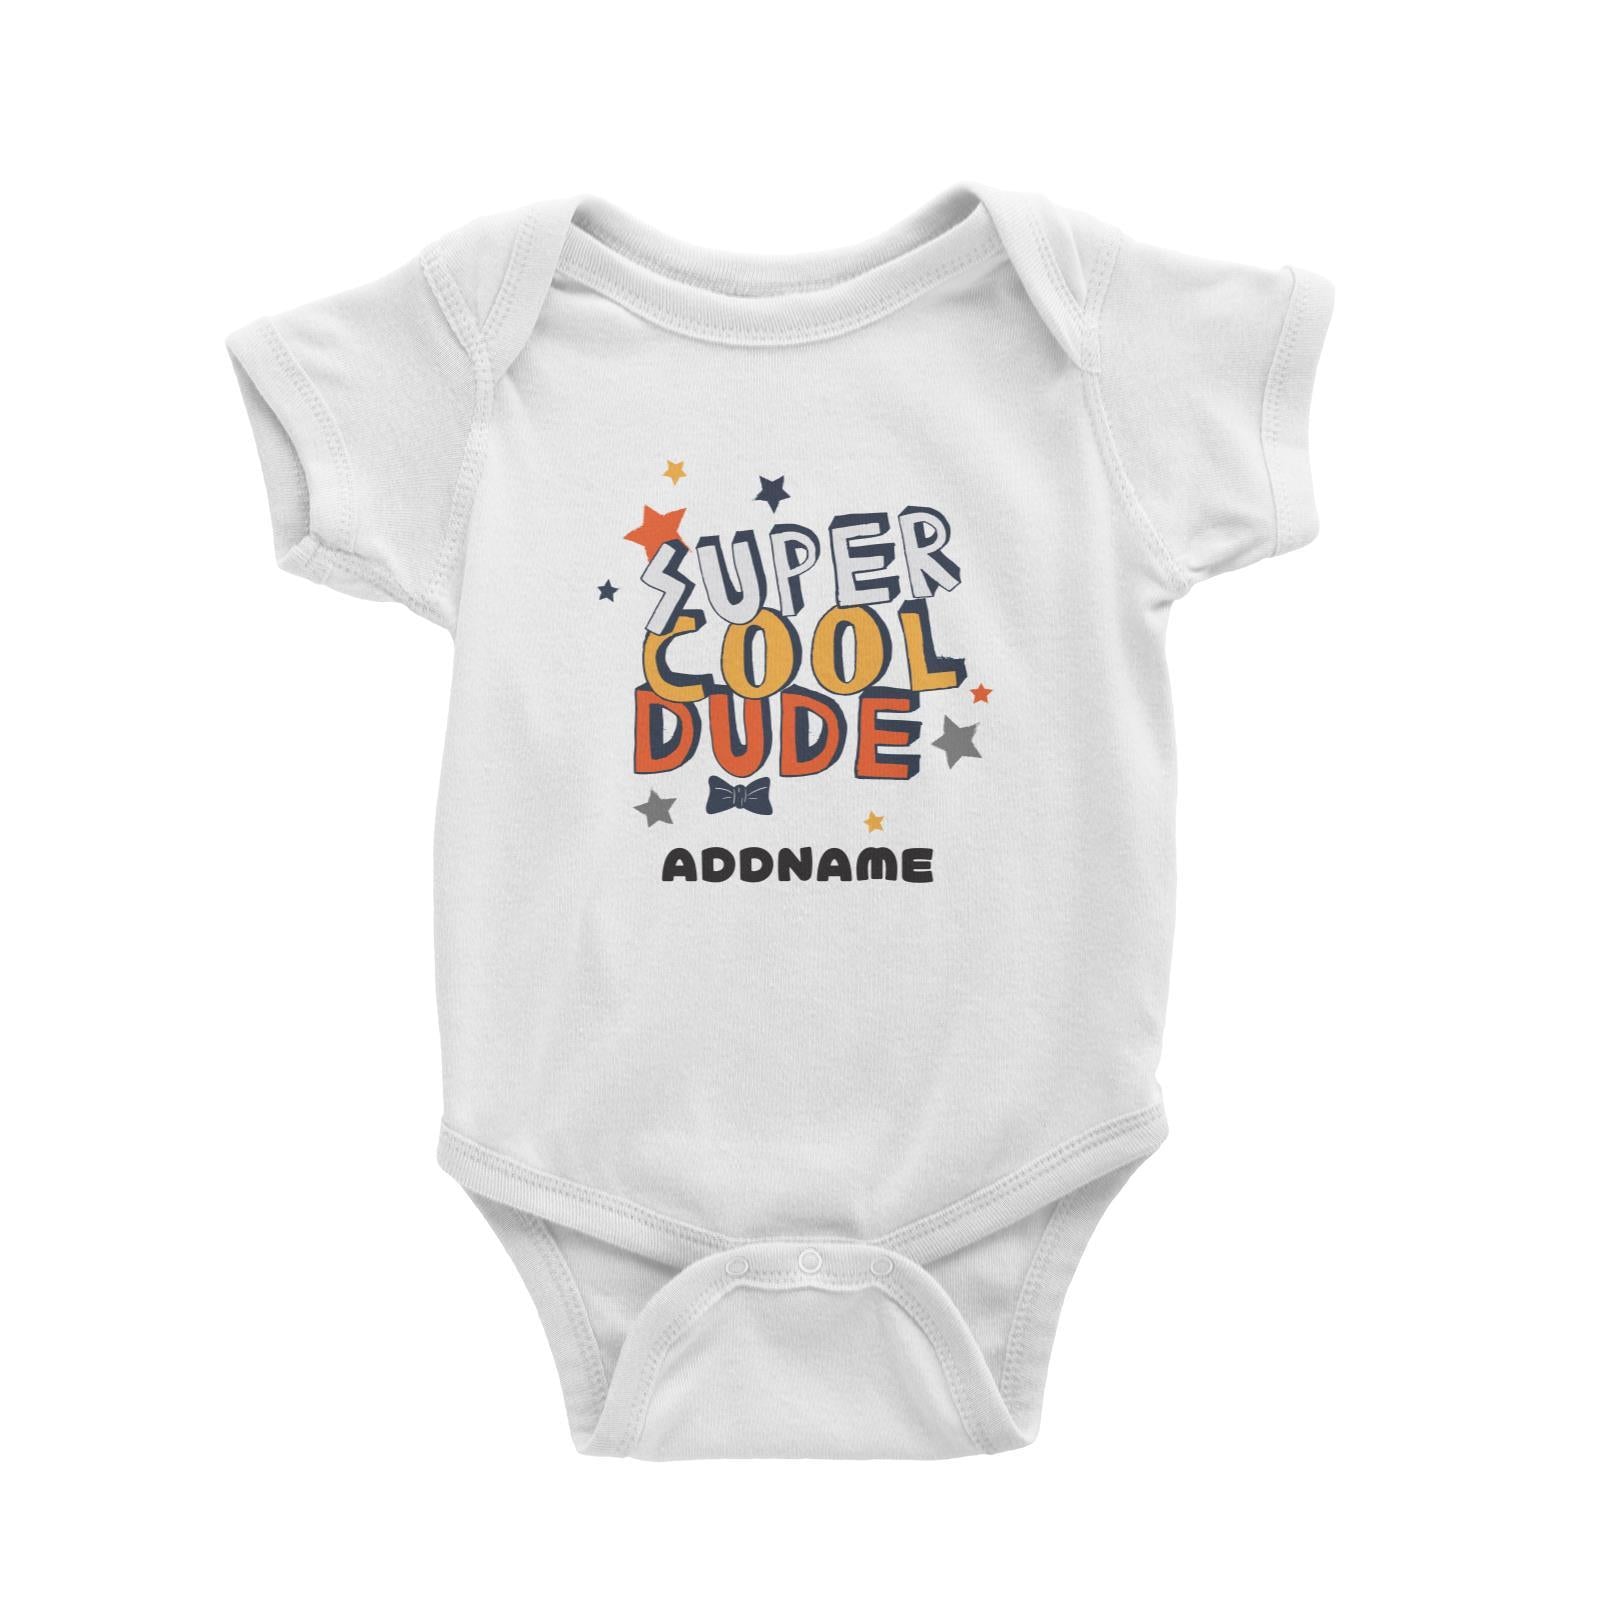 Super Cool Dude with Bow Tie Addname Baby Romper